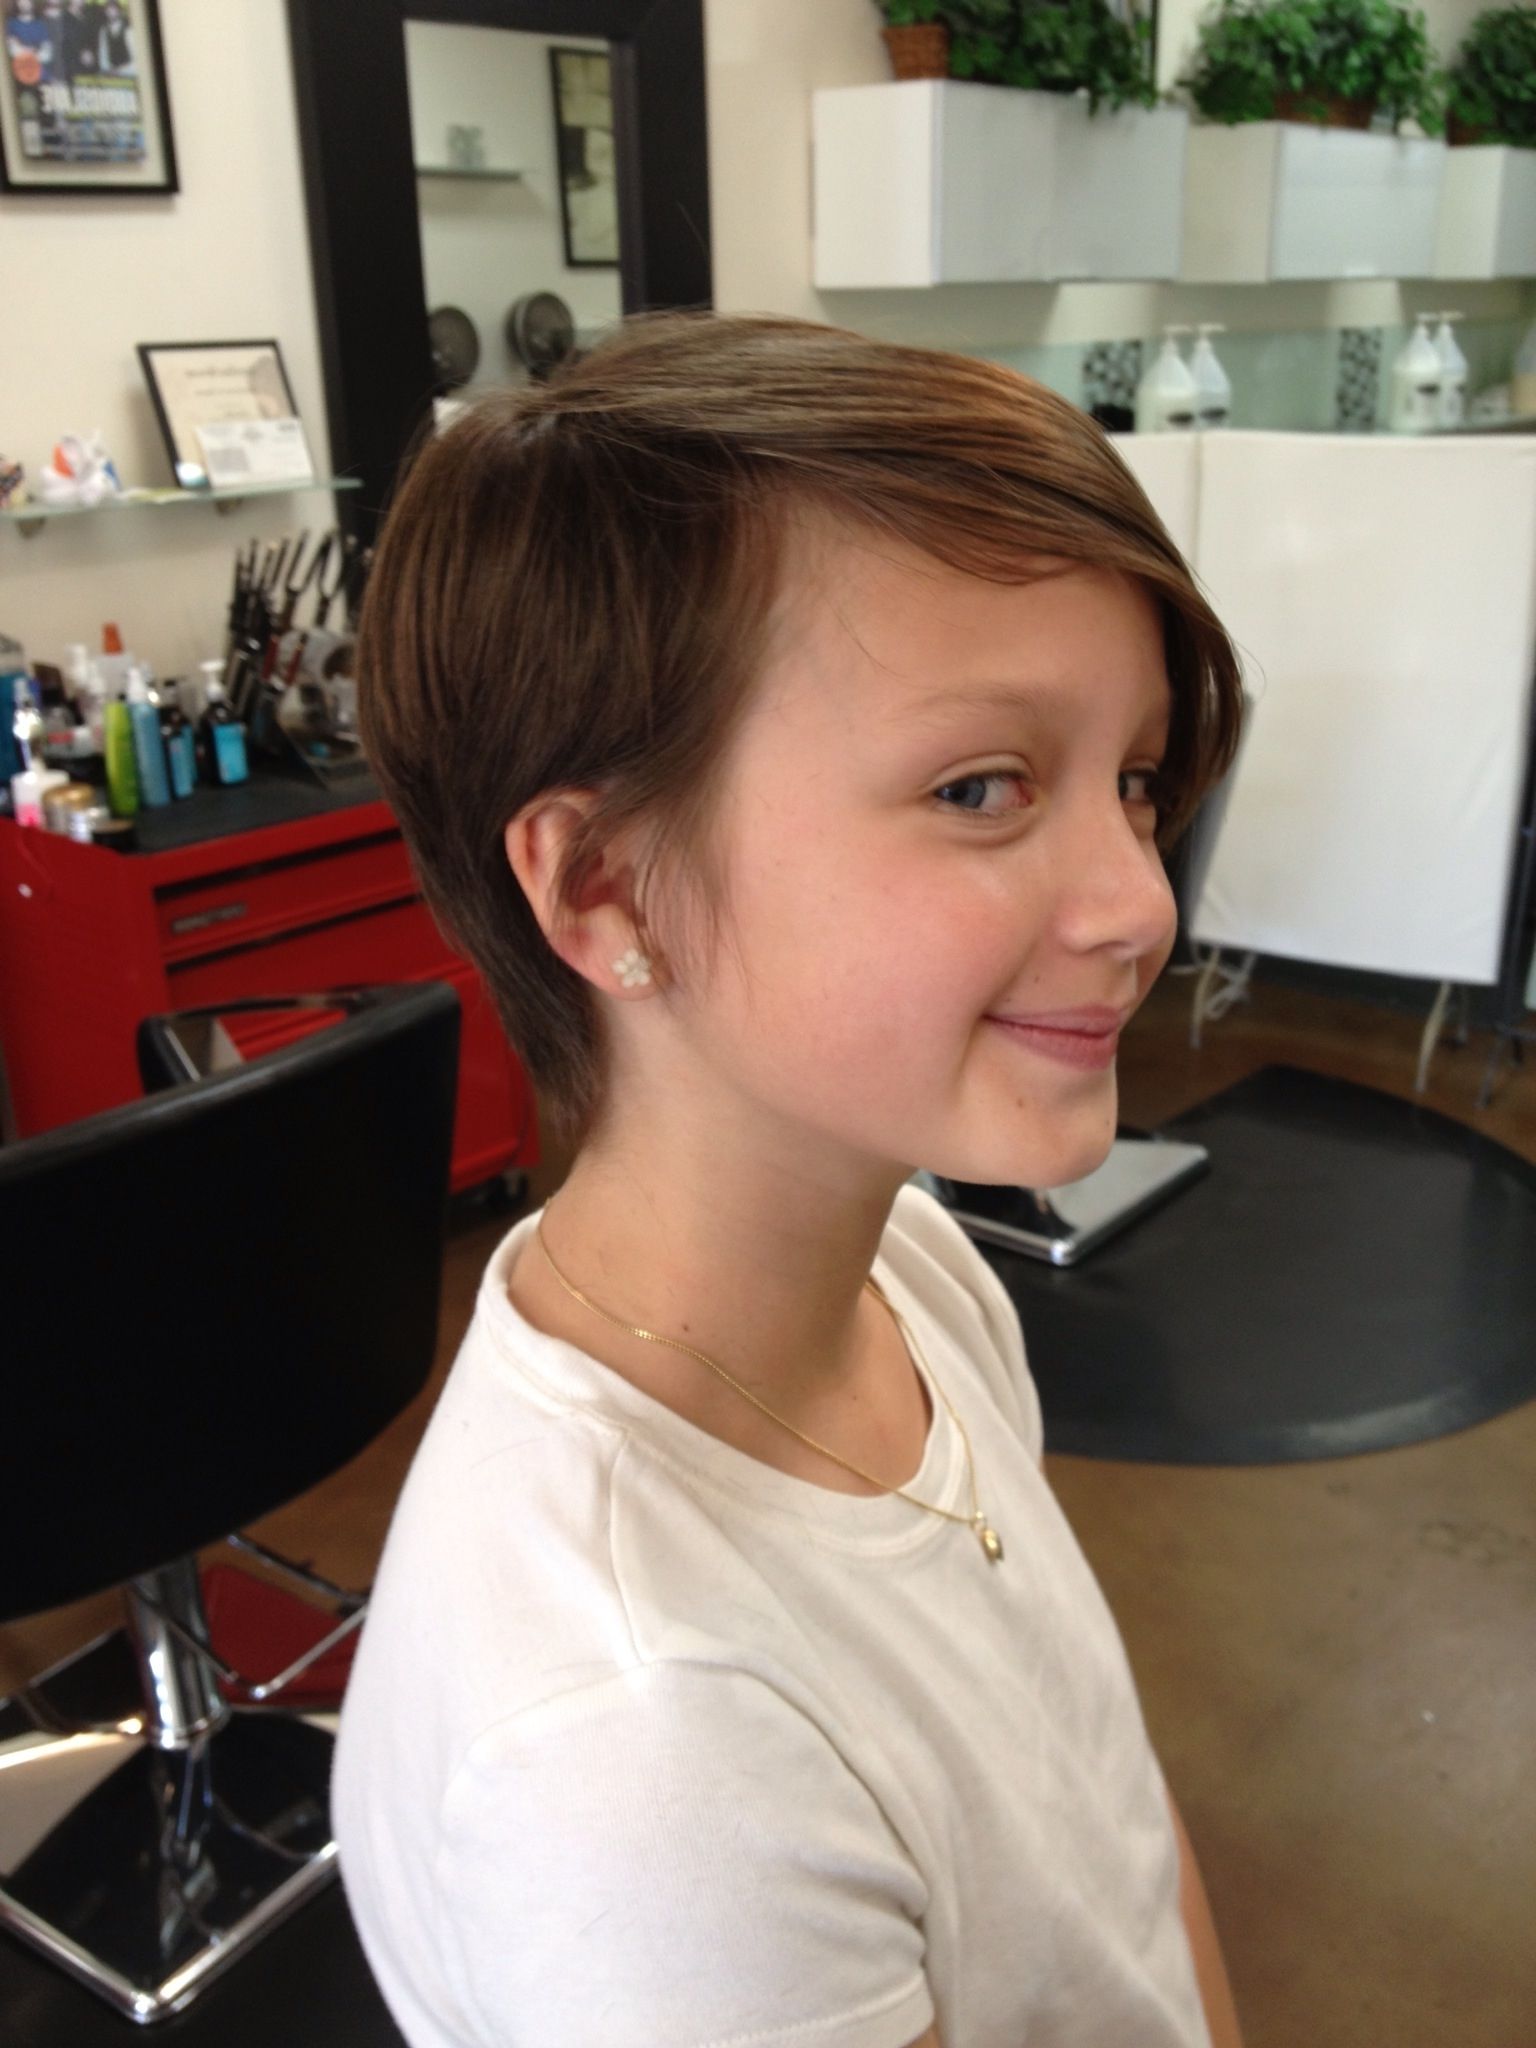 Cool Pixie Cut For A Tween (View 7 of 15)